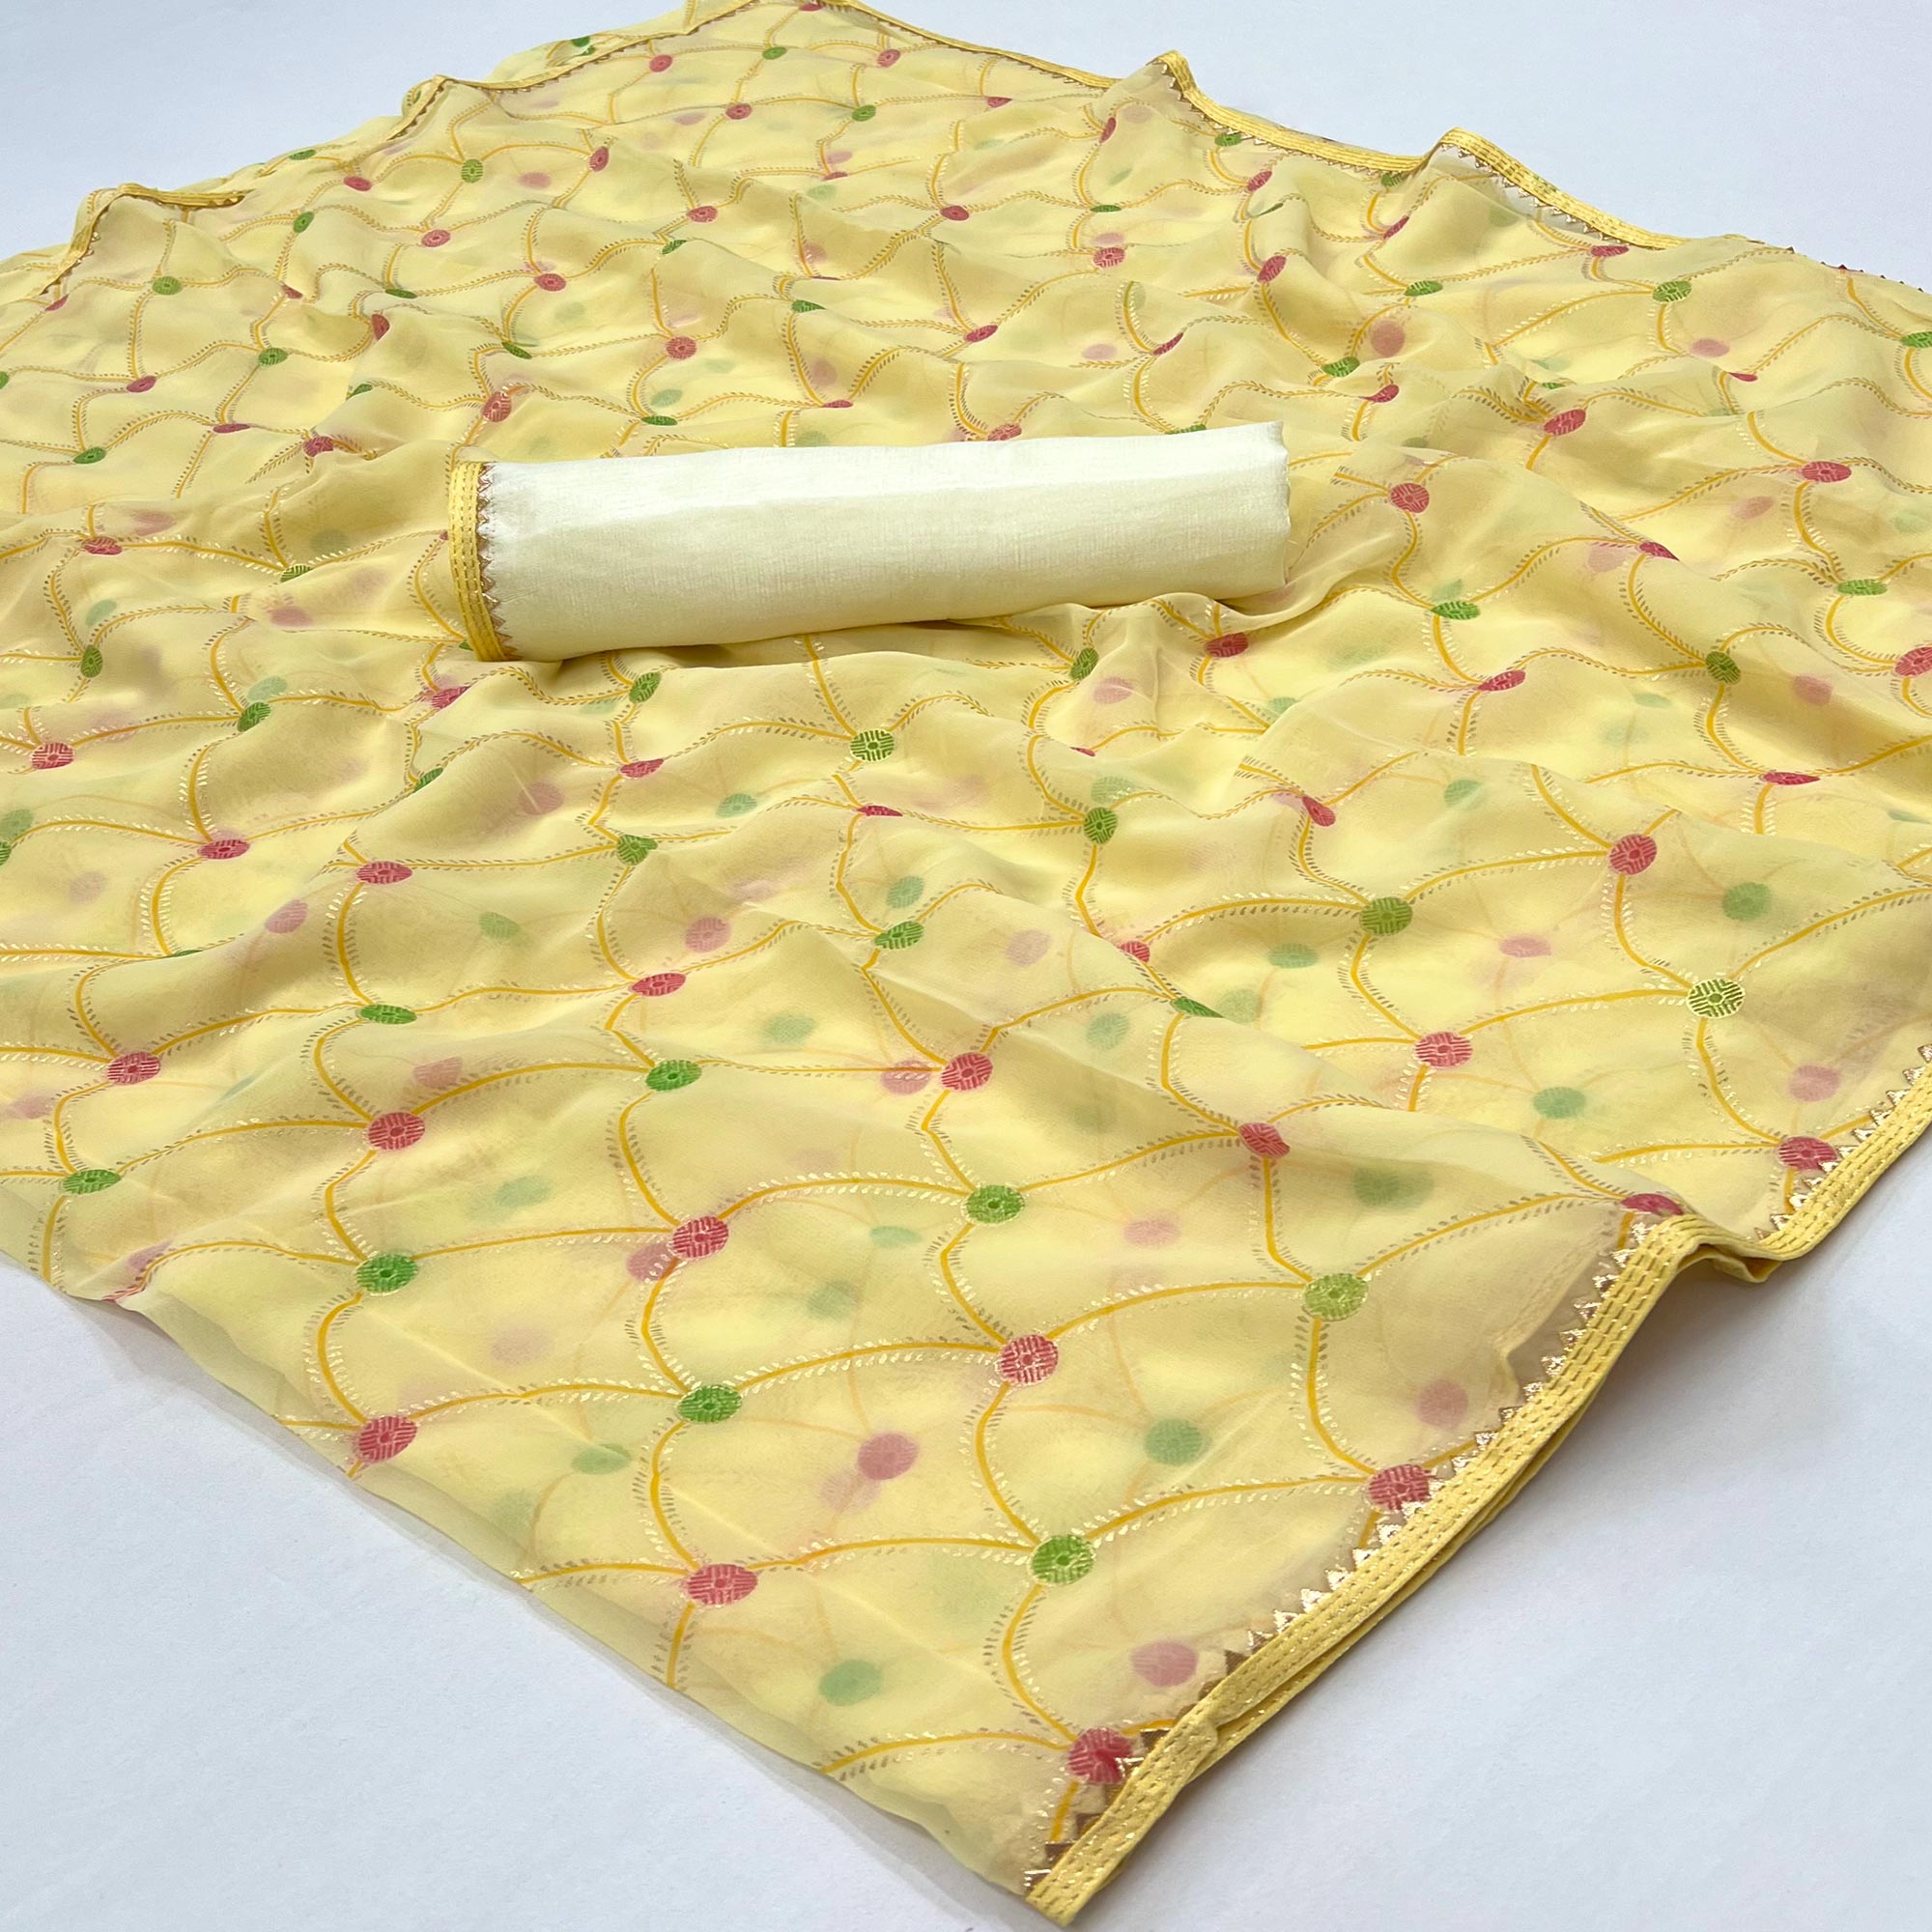 Yellow Foil Printed Georgette Saree